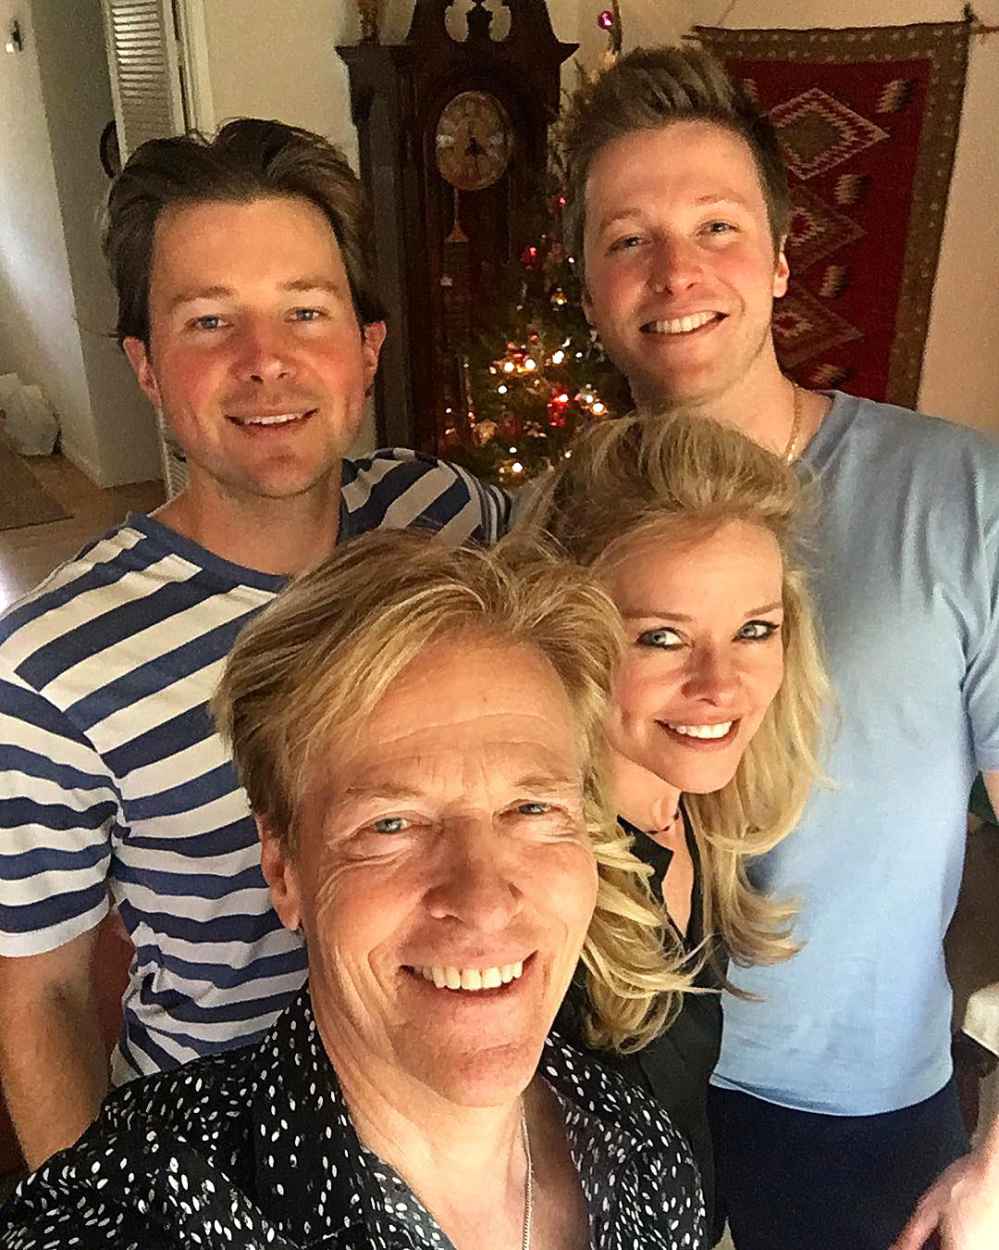 'General Hospital' Cast Attended Funeral for Jack Wagner and Kristina Wagner's Son Harrison: How They Supported Their Costars